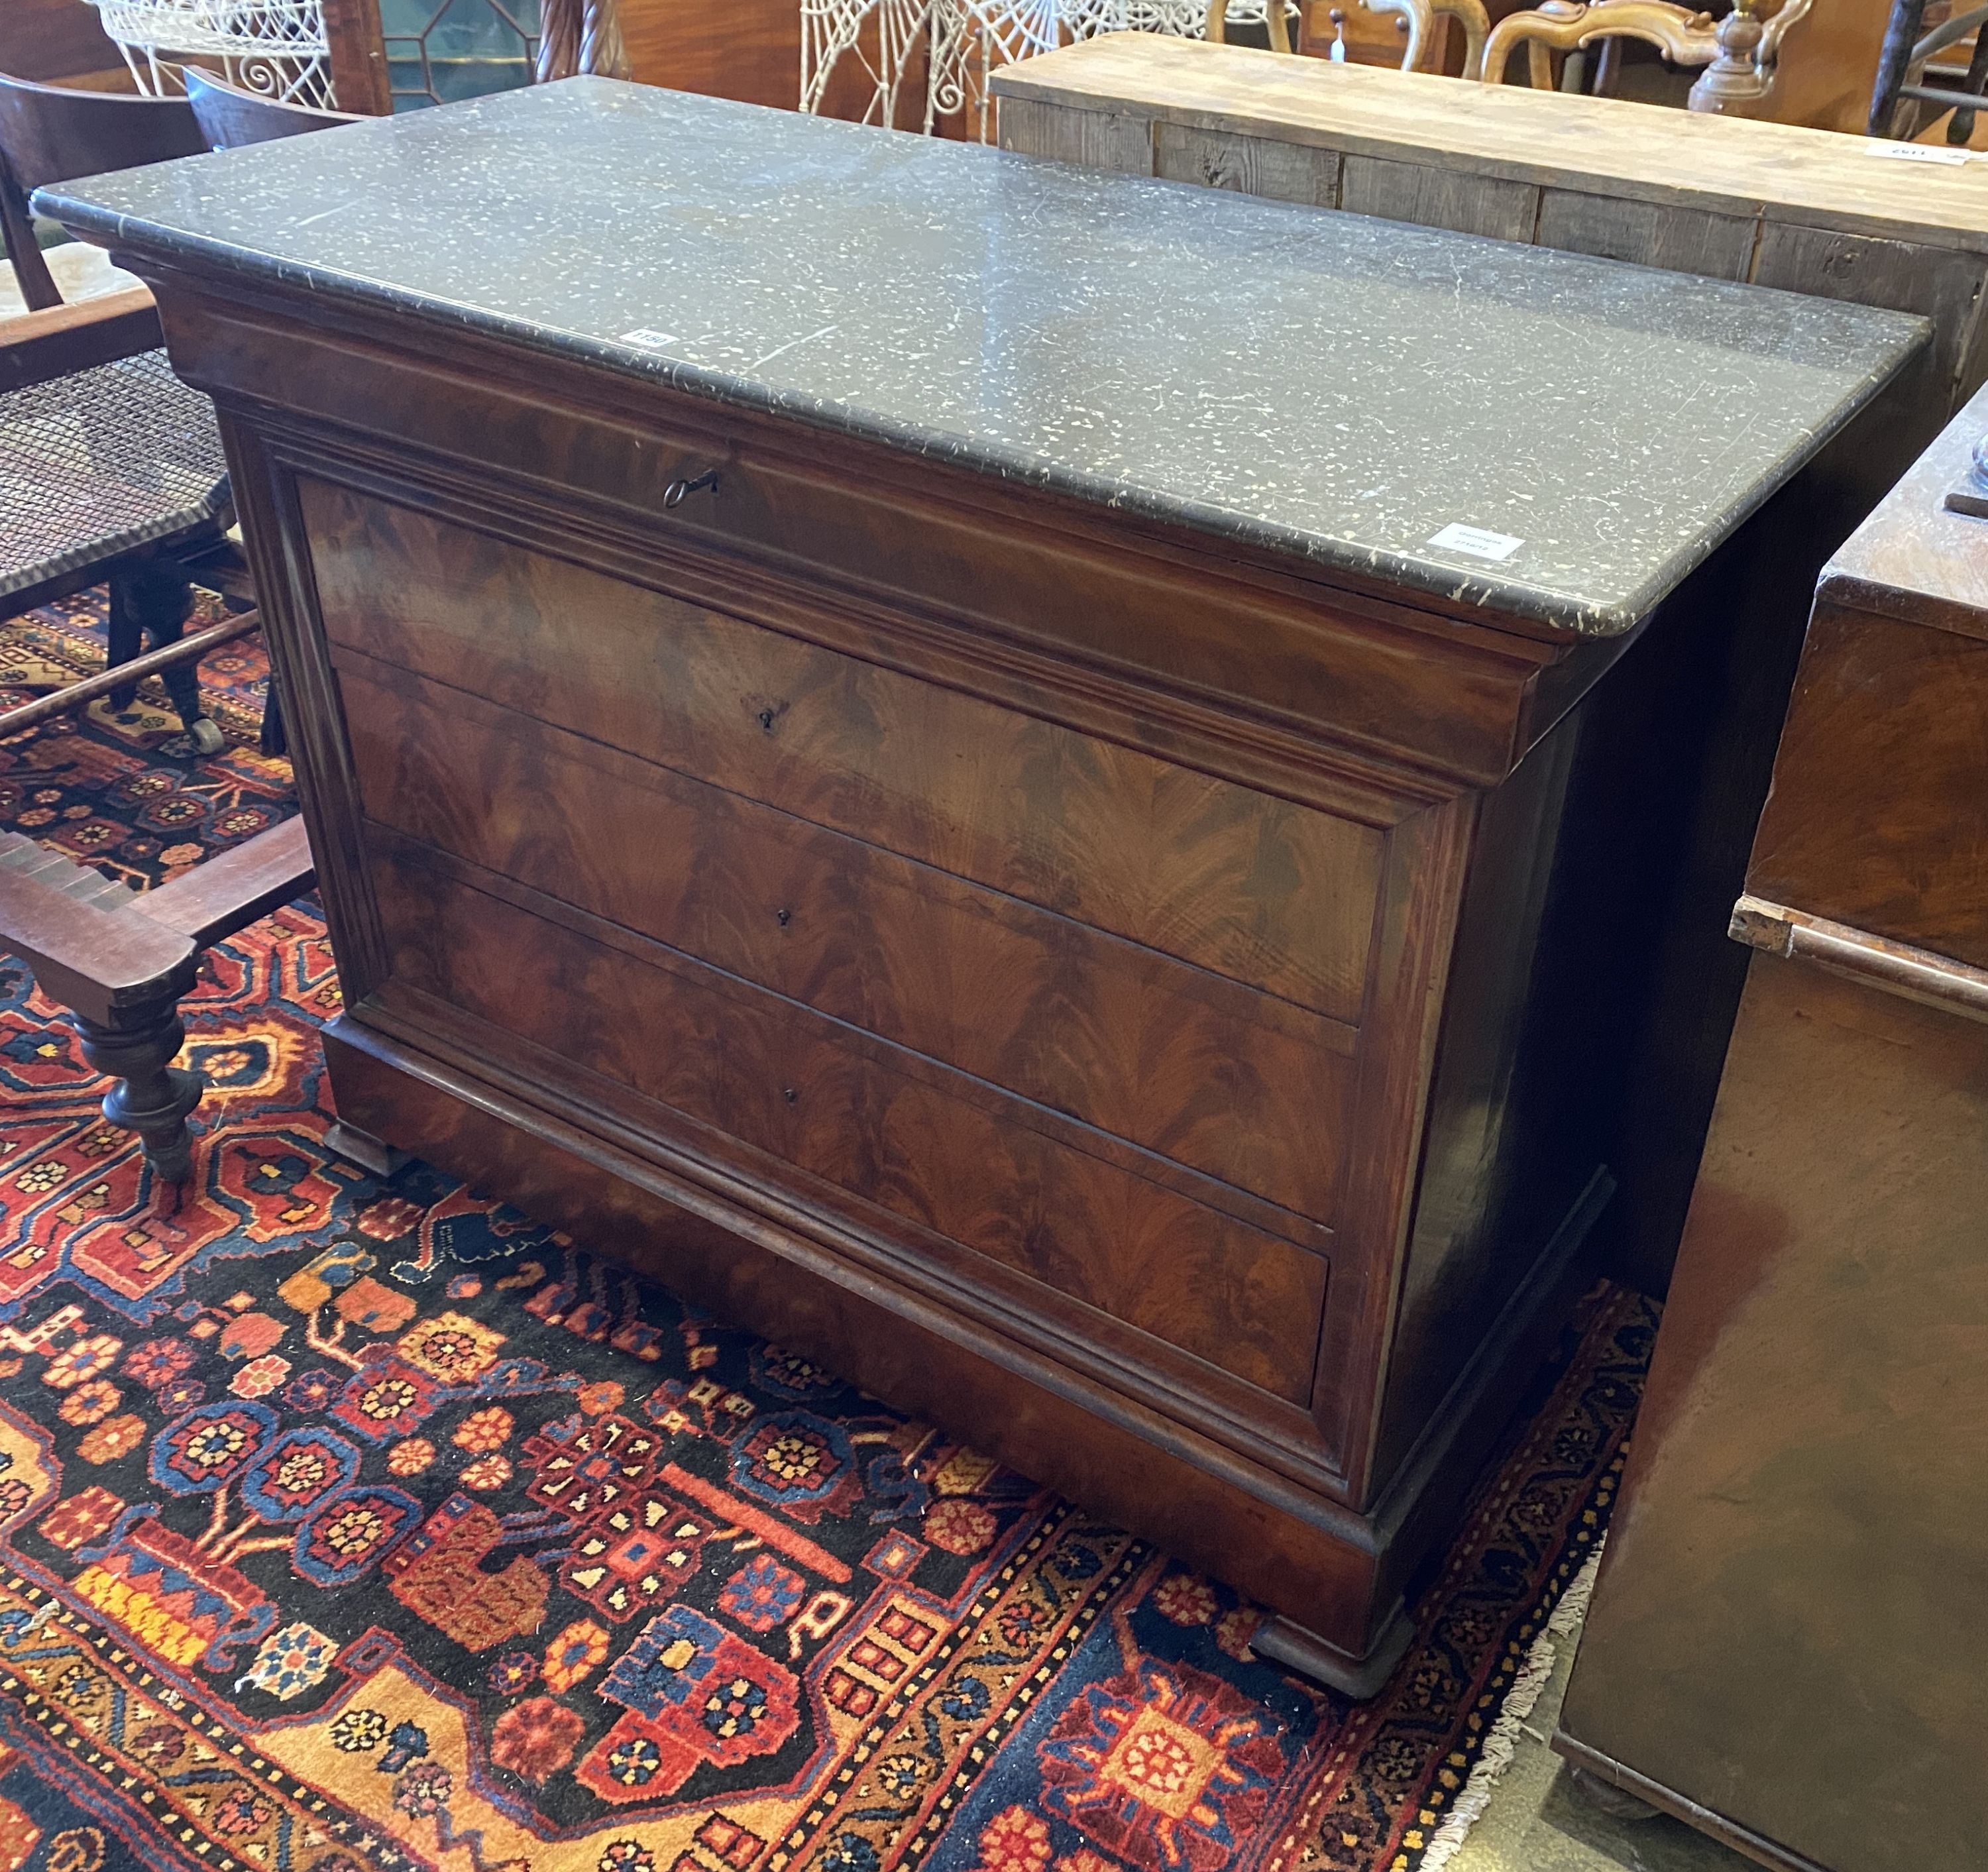 A 19th century continental flamed mahogany commode with black polished marble top, width 126cm, depth 58cm, height 95cm